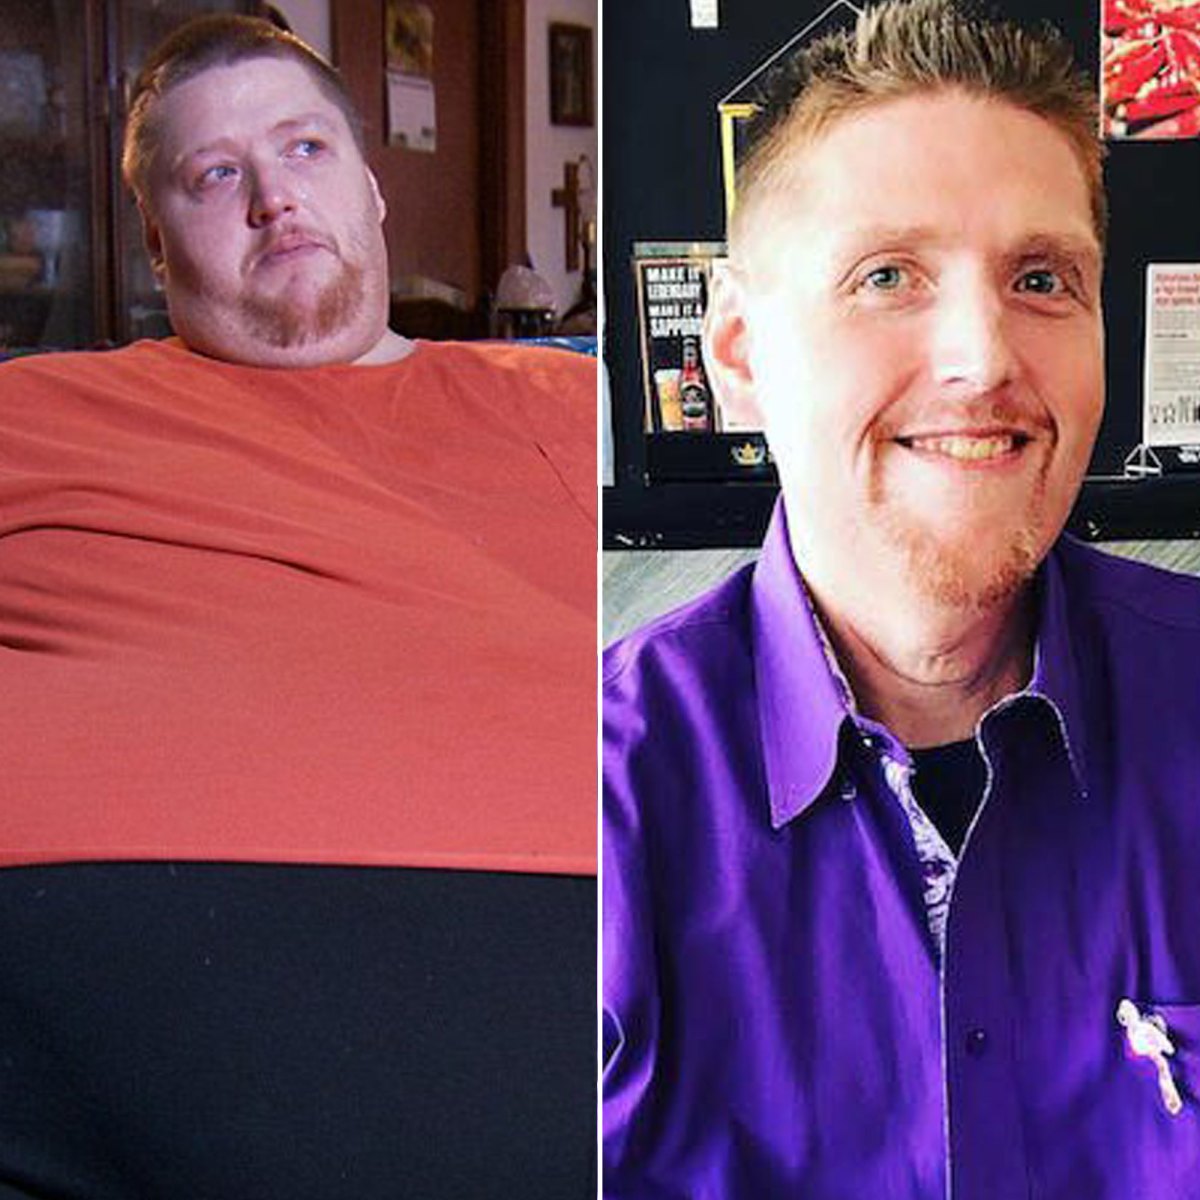 My 600 Lb Life Success Stories See Weight Loss Transformations